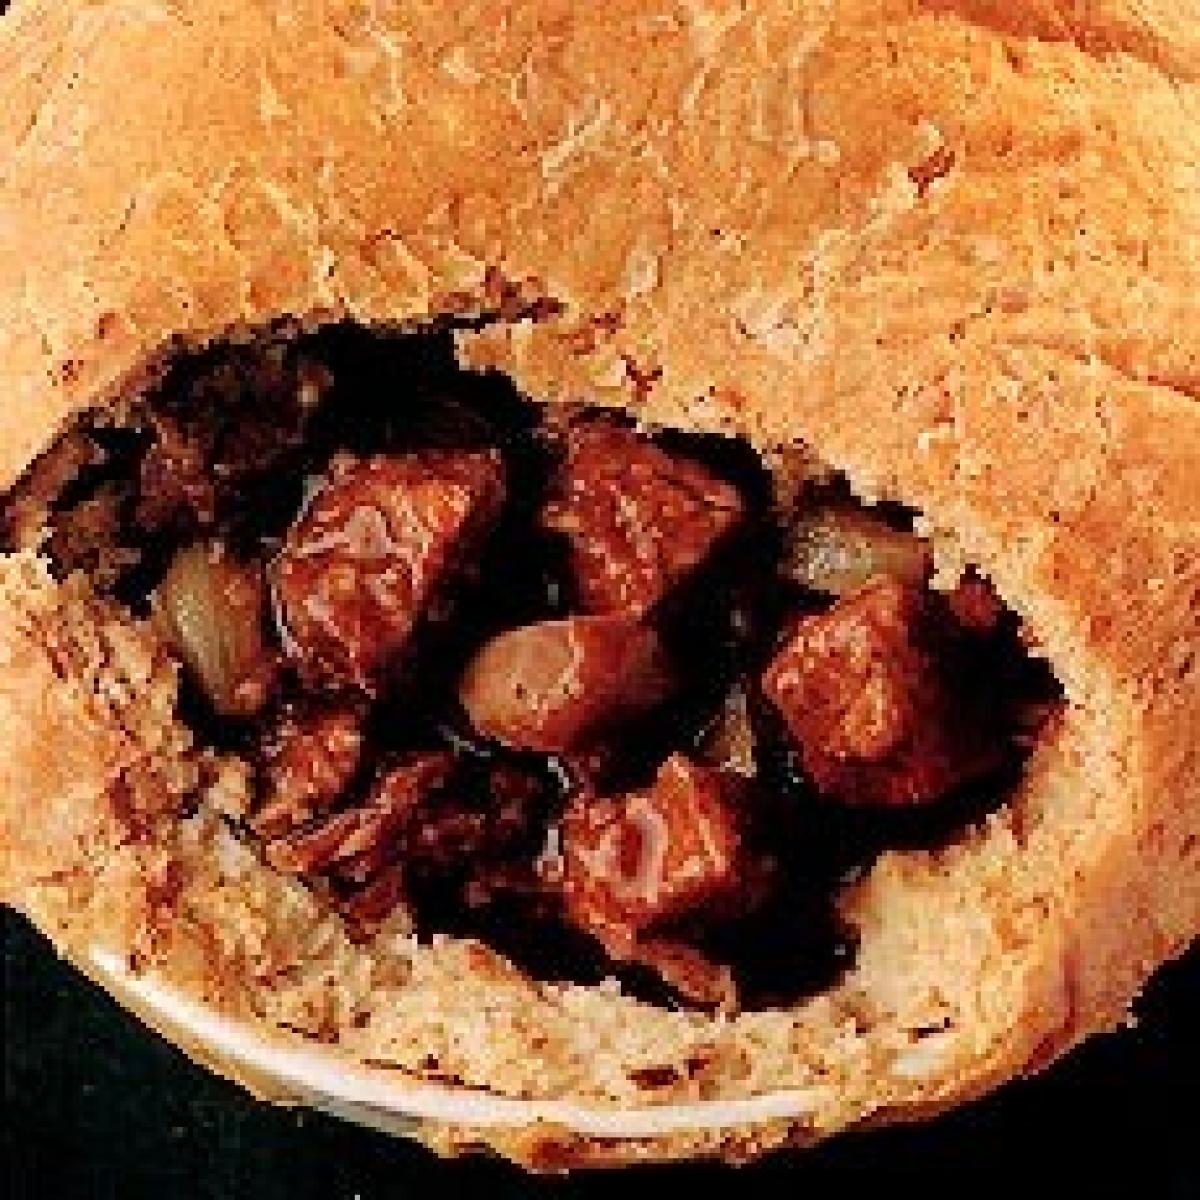 Steak And Kidney Pudding With